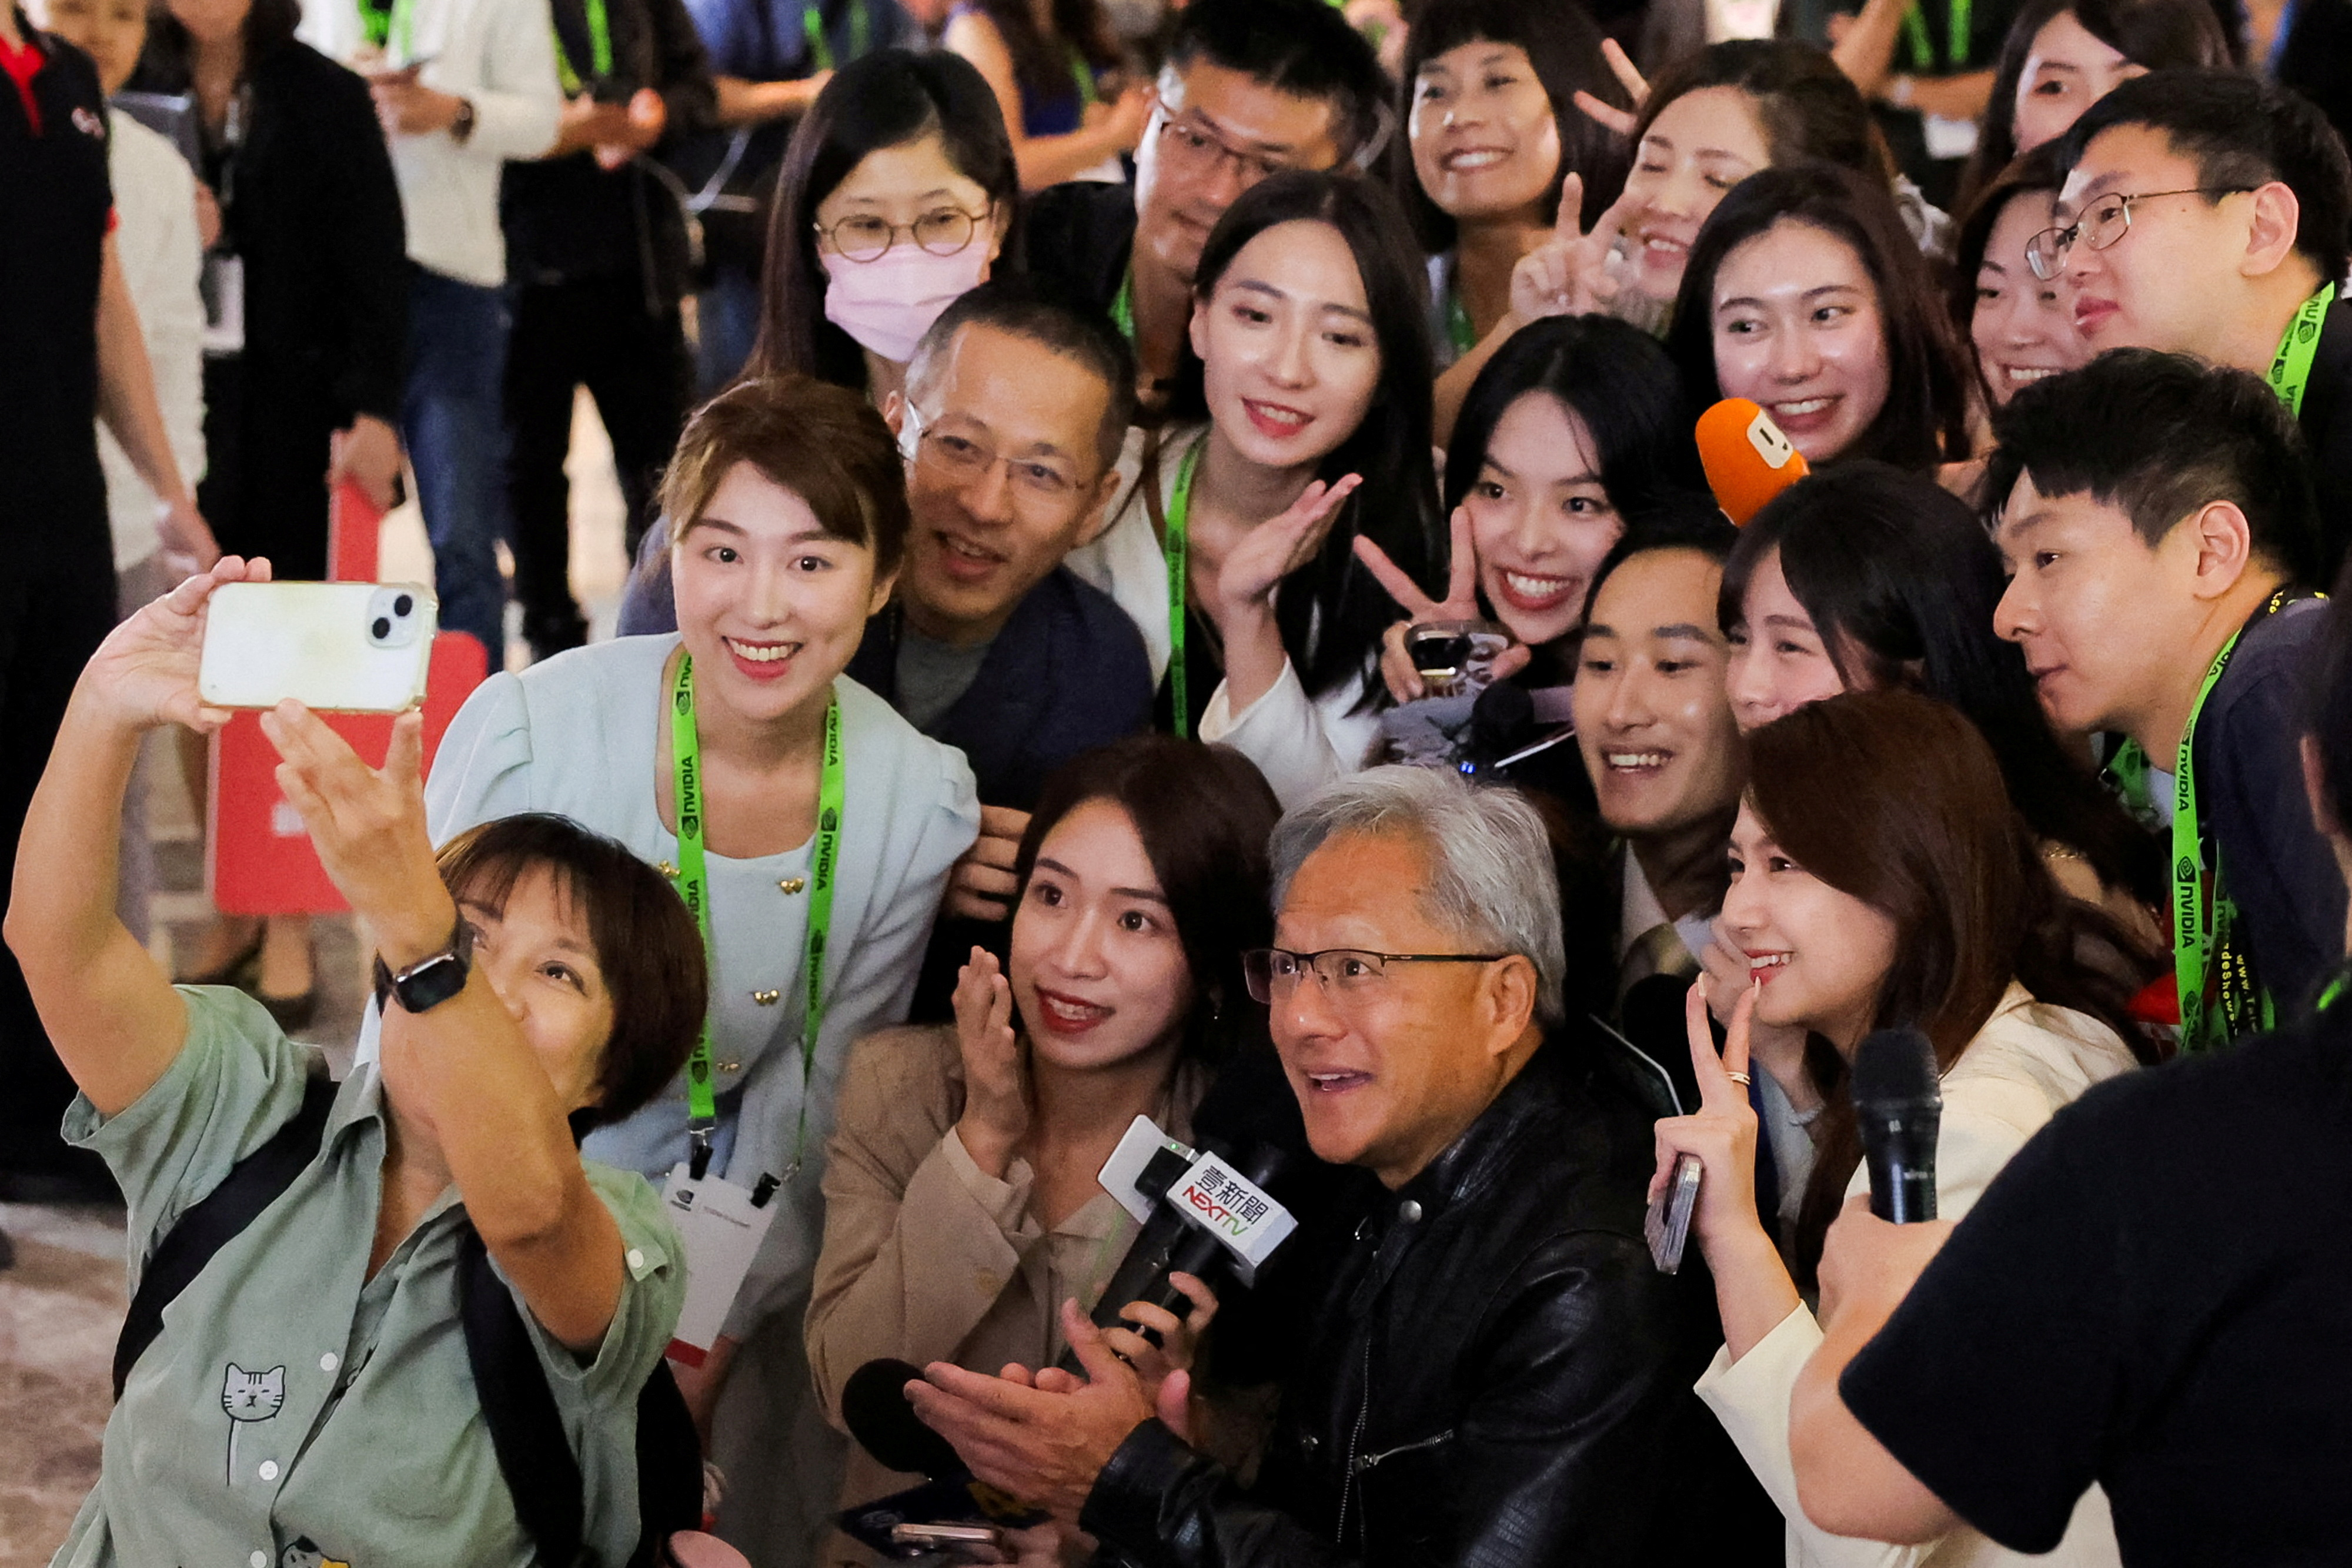 Nvidia CEO Jensen Huang poses for selfie with members of the media at COMPUTEX forum in Taipei